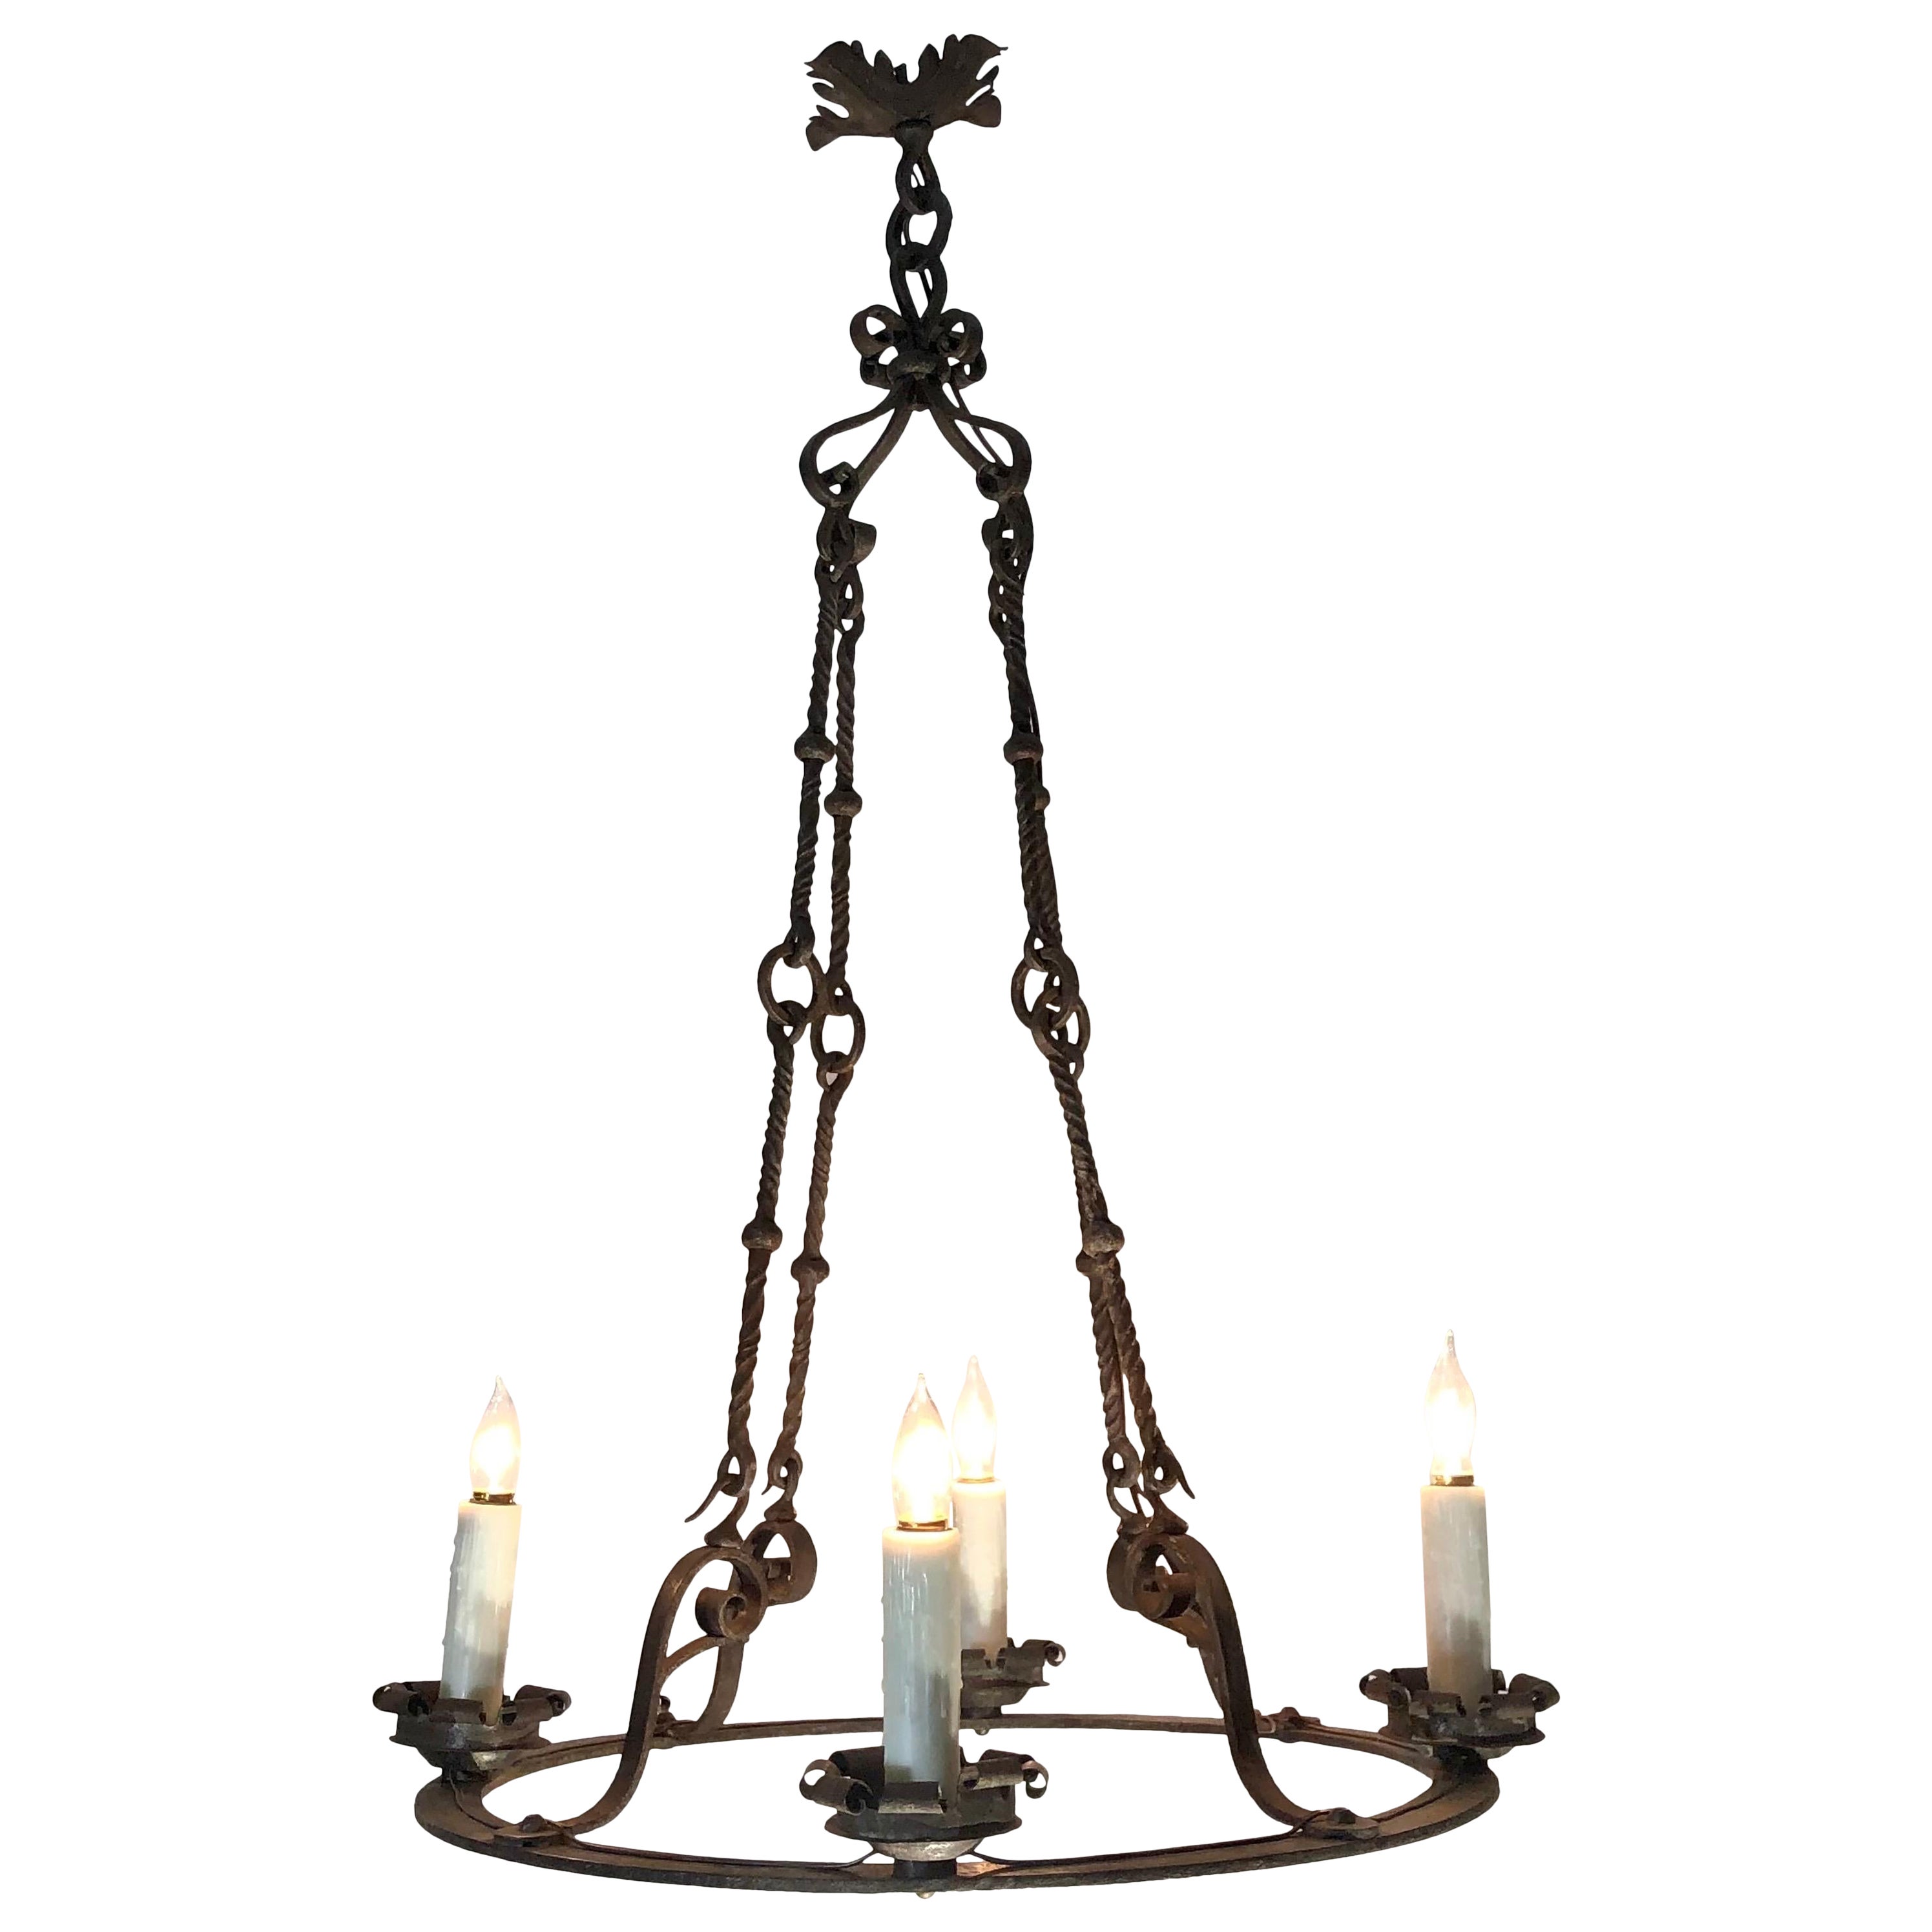 French Circular Hand-Wrought Iron Chandelier. 19th Century